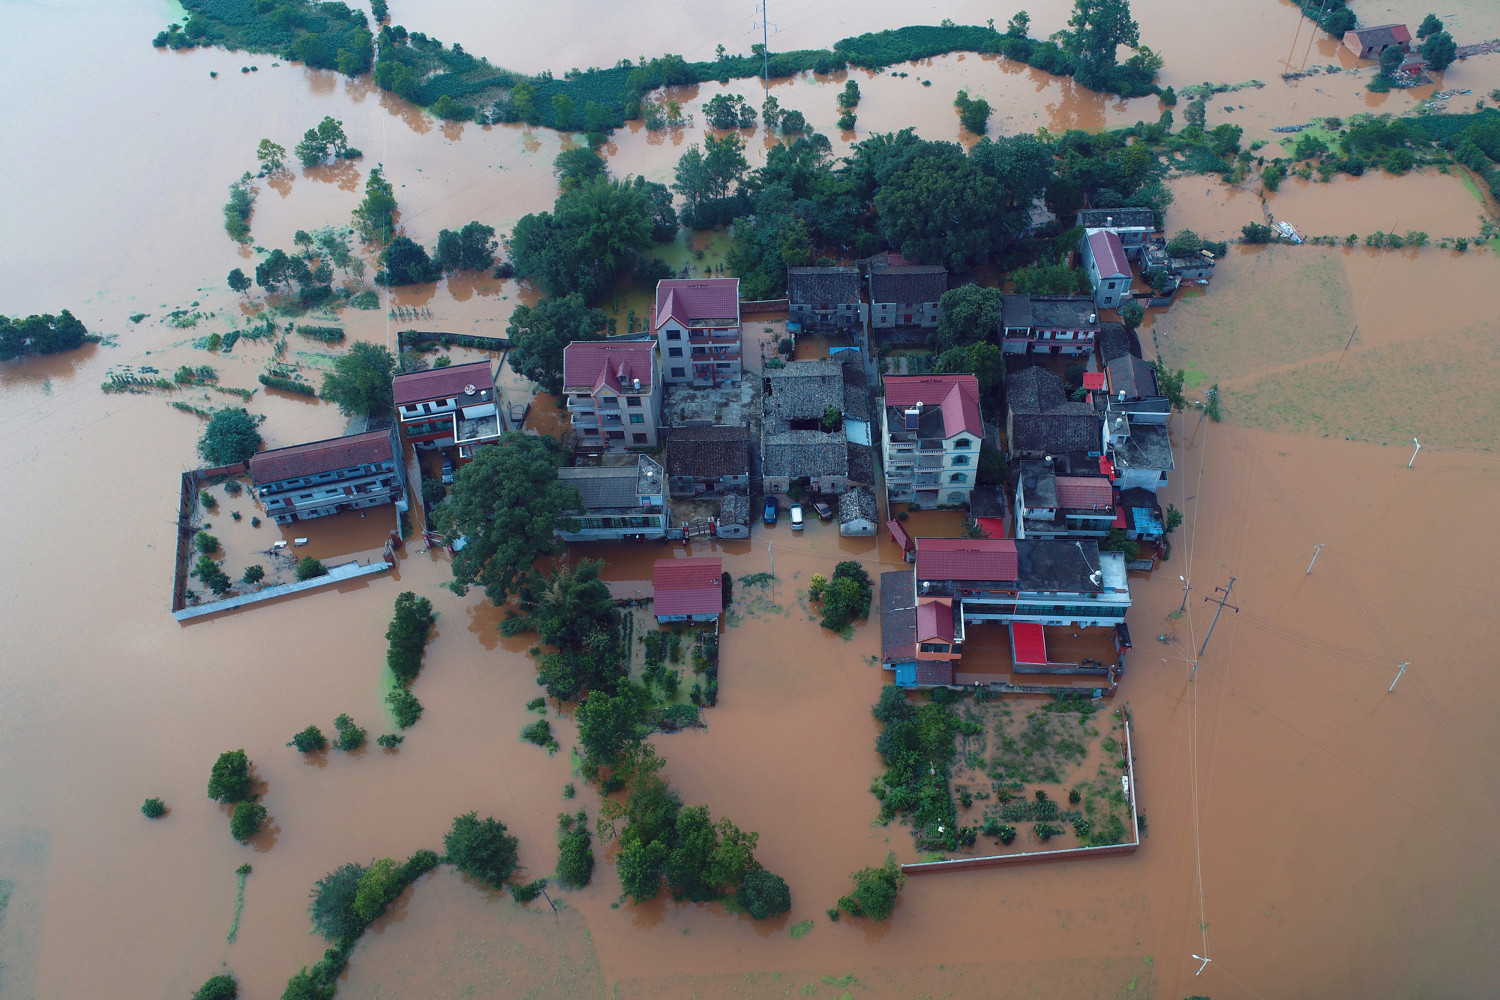 Thousands Stranded, Five killed, as Heavy Rain Lashes South China